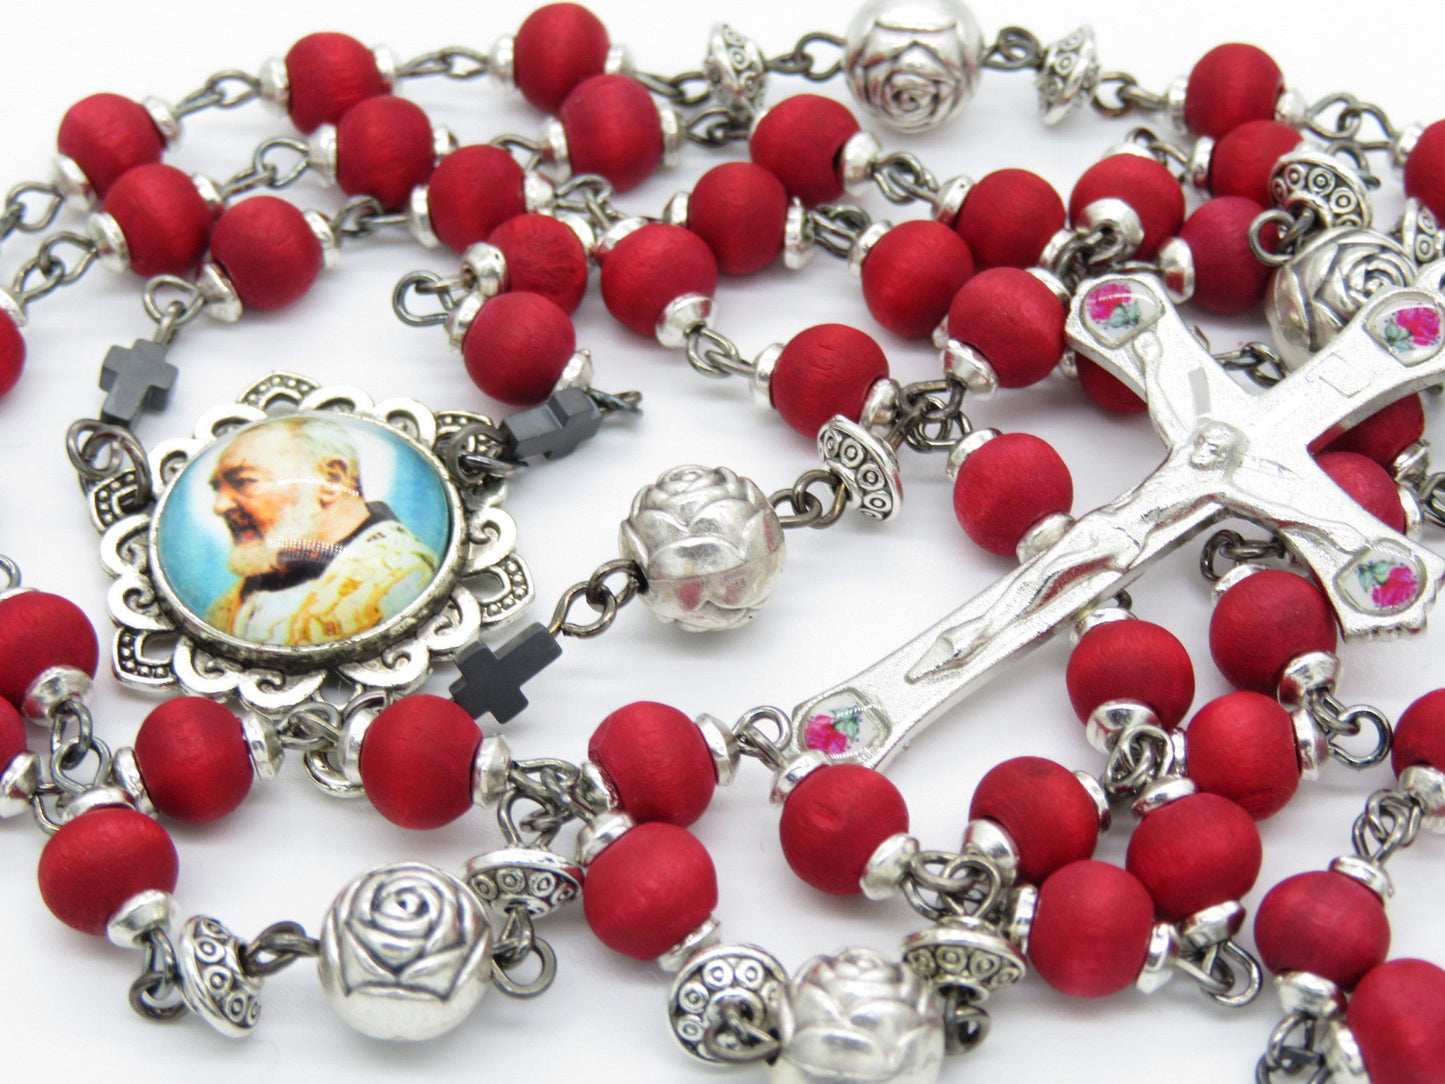 St. Padre Pio wooden handcrafted Rosaries, Wooden Rosary beads, Rose Crucifix, St. Pio Rosary beads, rosary beads, Men's Rosaries.